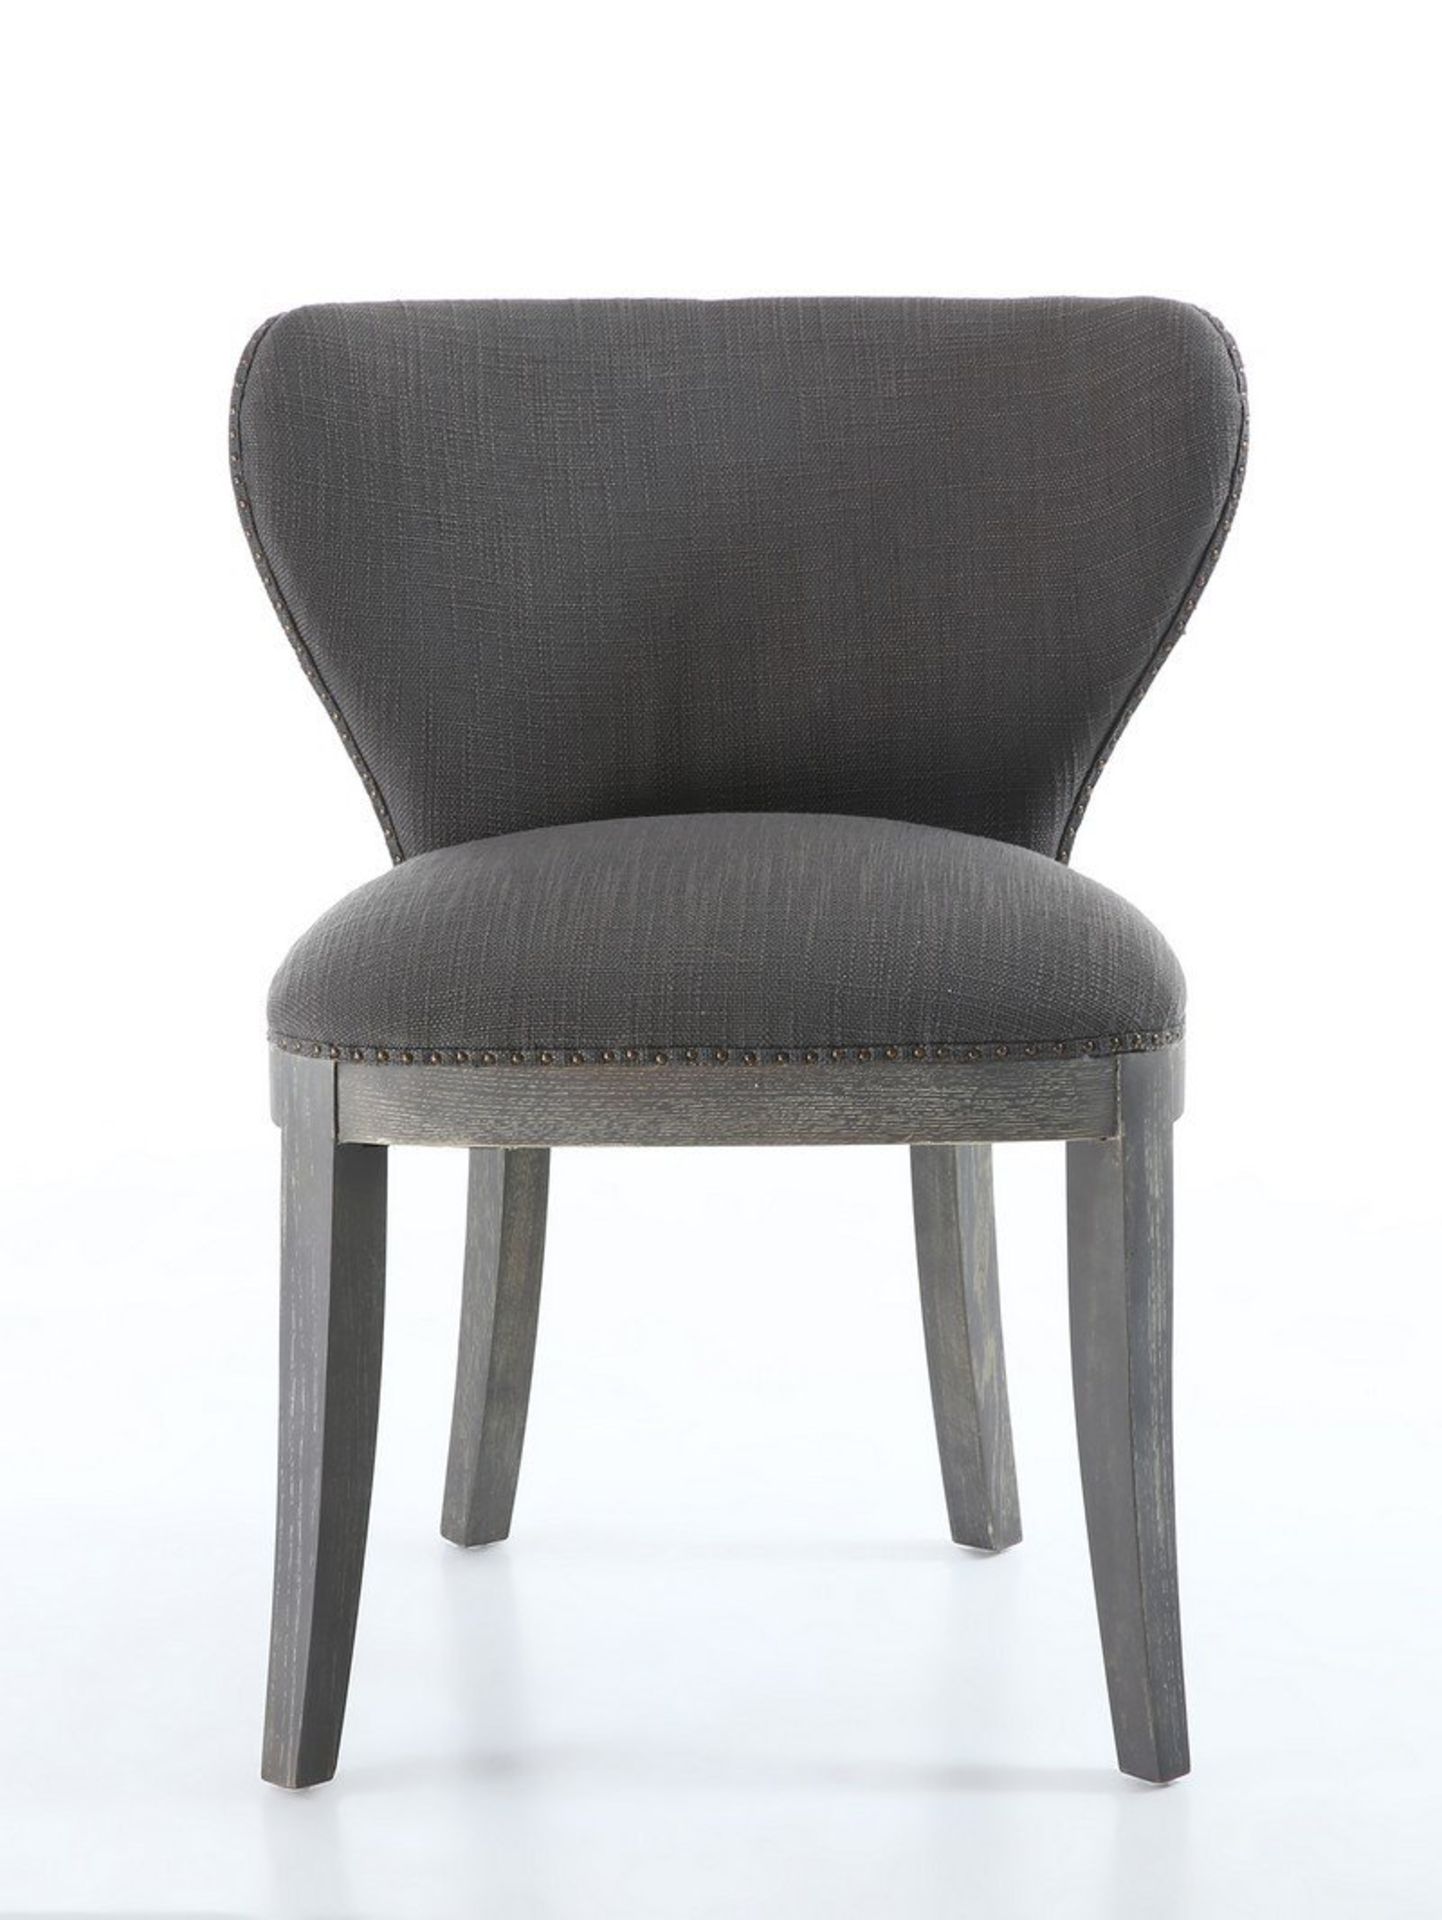 Regal Antique Grey Linen Fabric Wing back Dining chair - Image 2 of 5